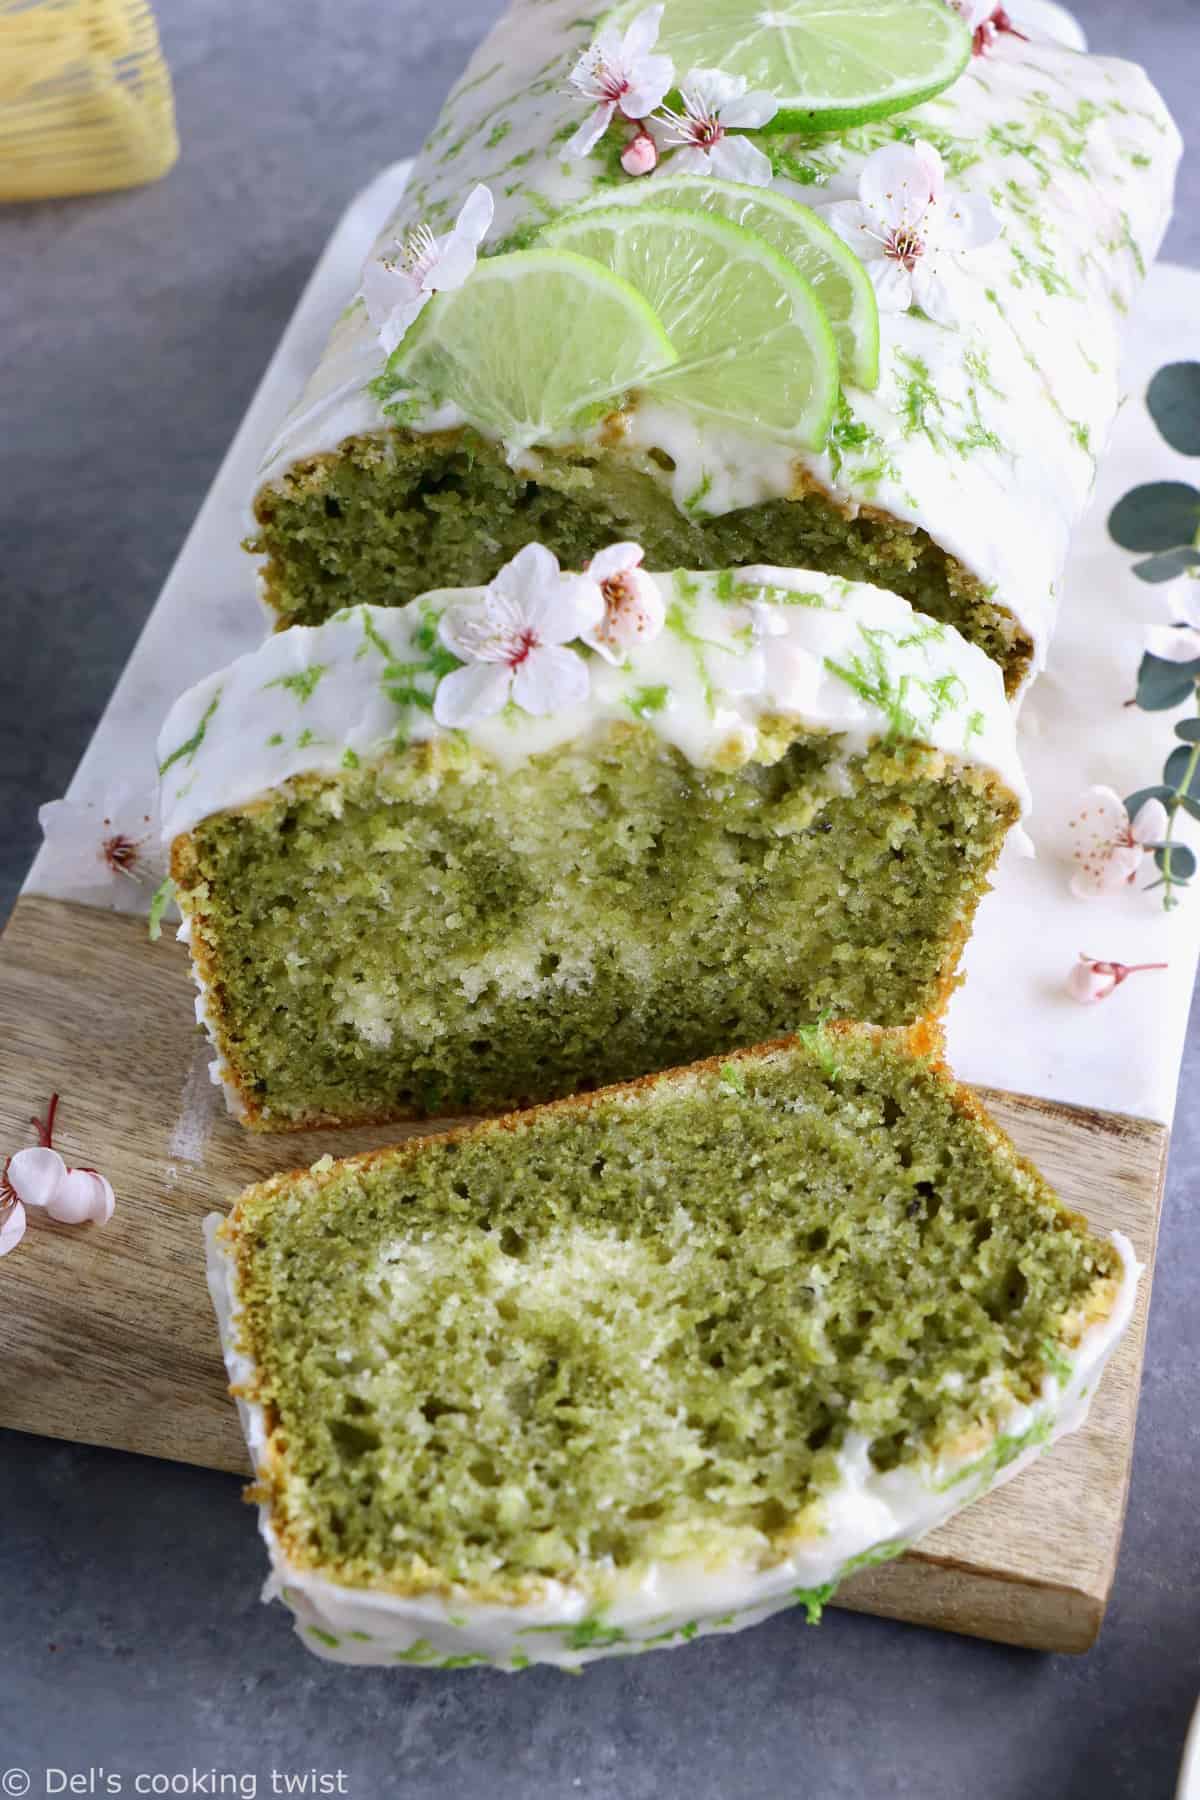 This matcha marble pound cake is the perfect addition to your afternoon tea. Made entirely dairy-free, it offers a perfect balance between sweet, earthy flavors and refreshing lime notes.